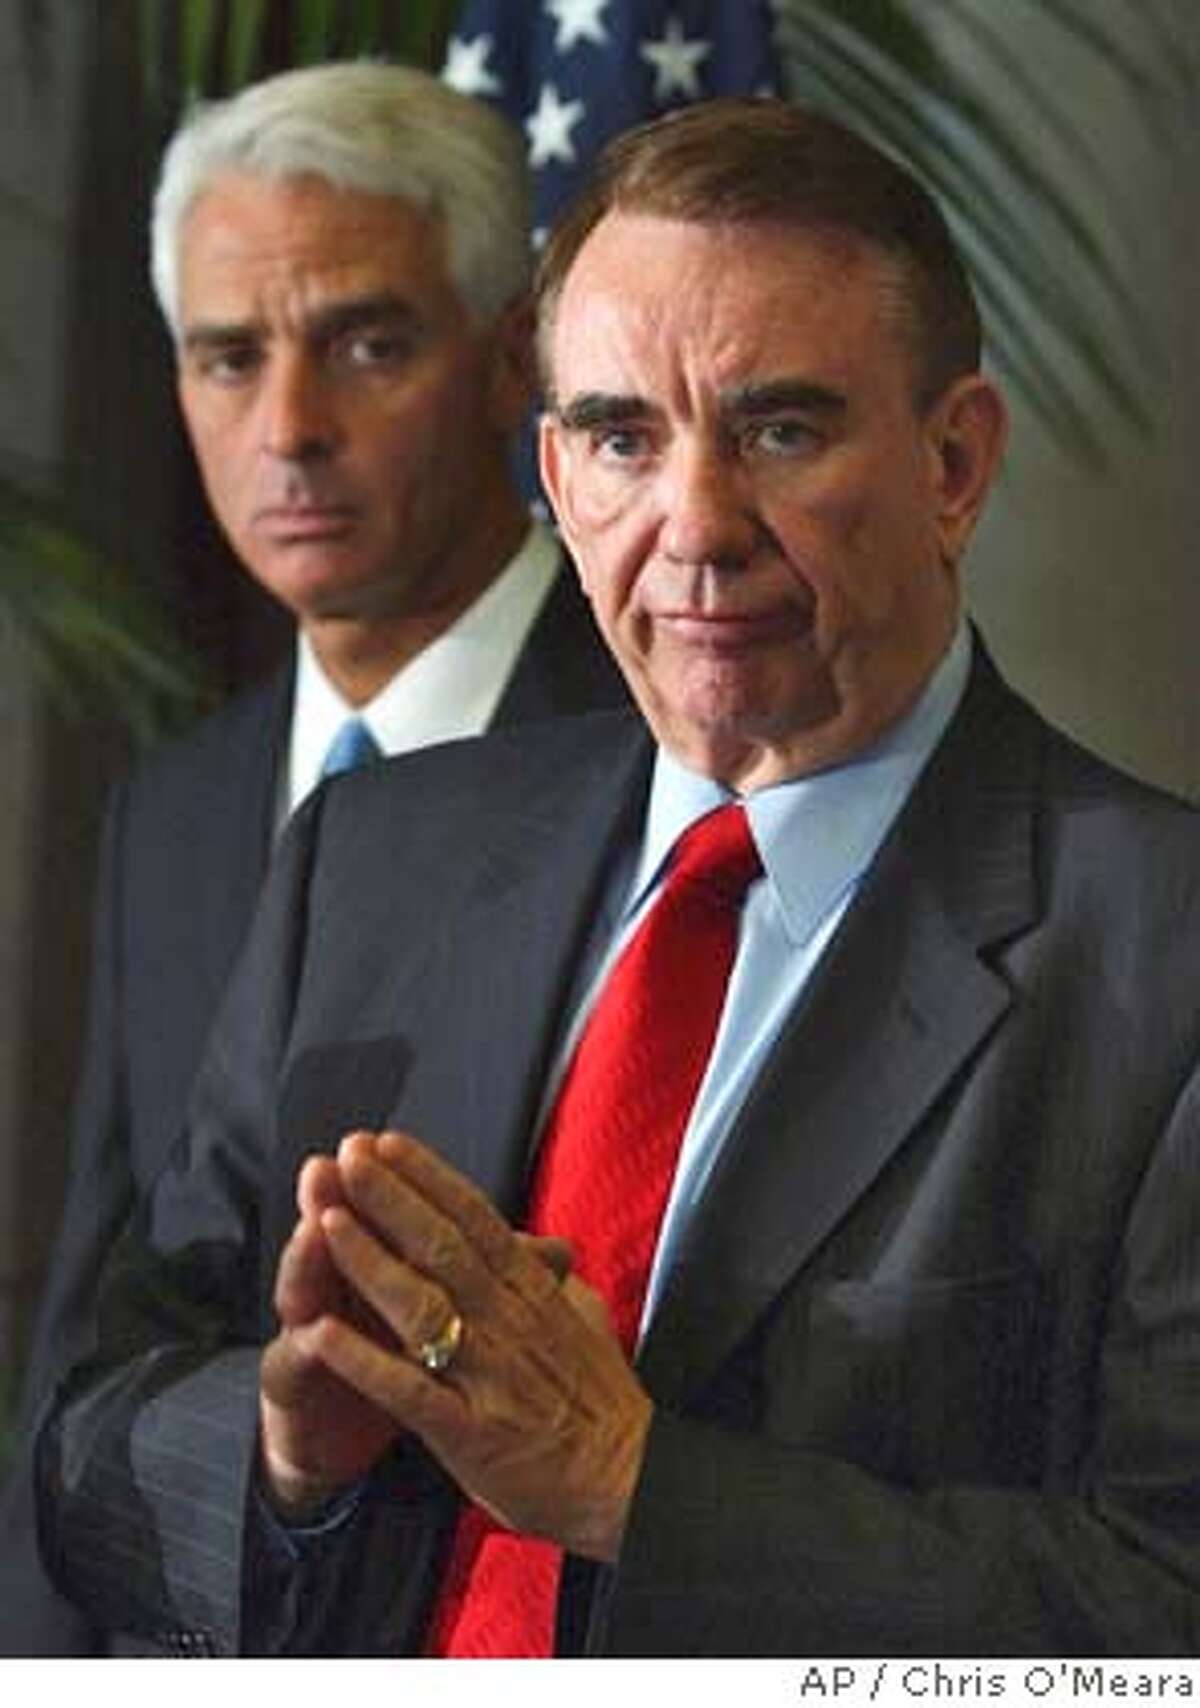 U.S. Dept. of Health and Human Services Secretary Tommy Thompson, right, gestures as he stand with Florida Attorney General Charlie Crist during a news conference Monday morning Oct. 18, 2004 in Tampa, Fla. Thompson was with Crist to announce that the Department will join the state of Florida in a case involving excessive markups of the flu vaccine. (AP Photo/Chris O'Meara)